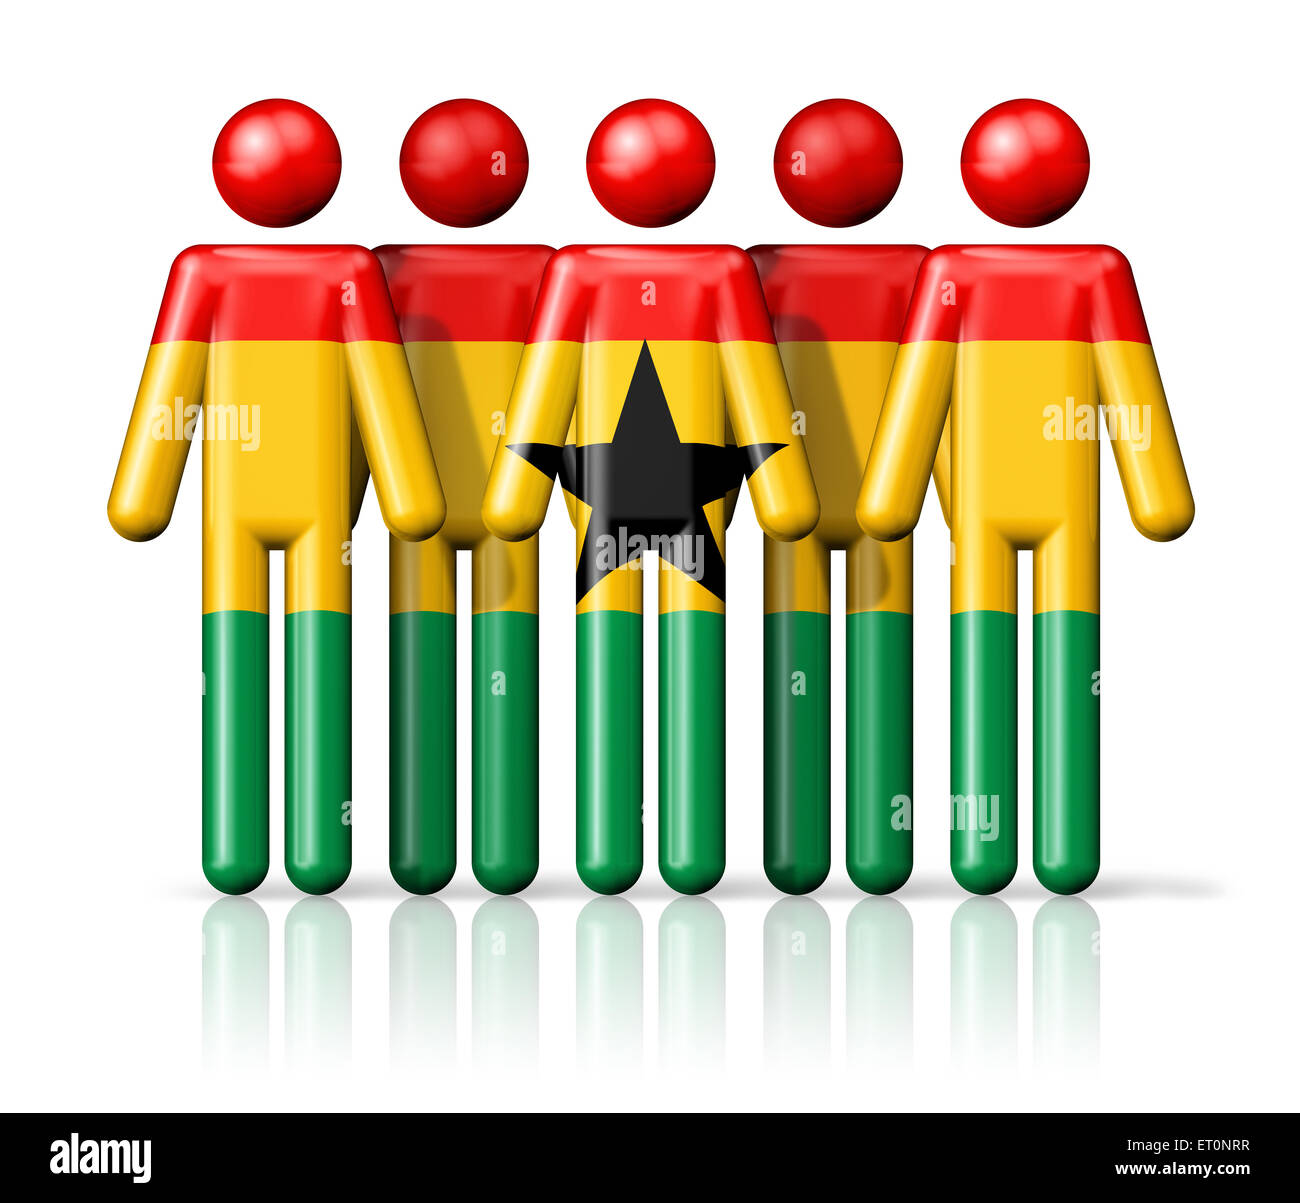 Flag of Ghana on stick figure - national and social community symbol 3D icon Stock Photo